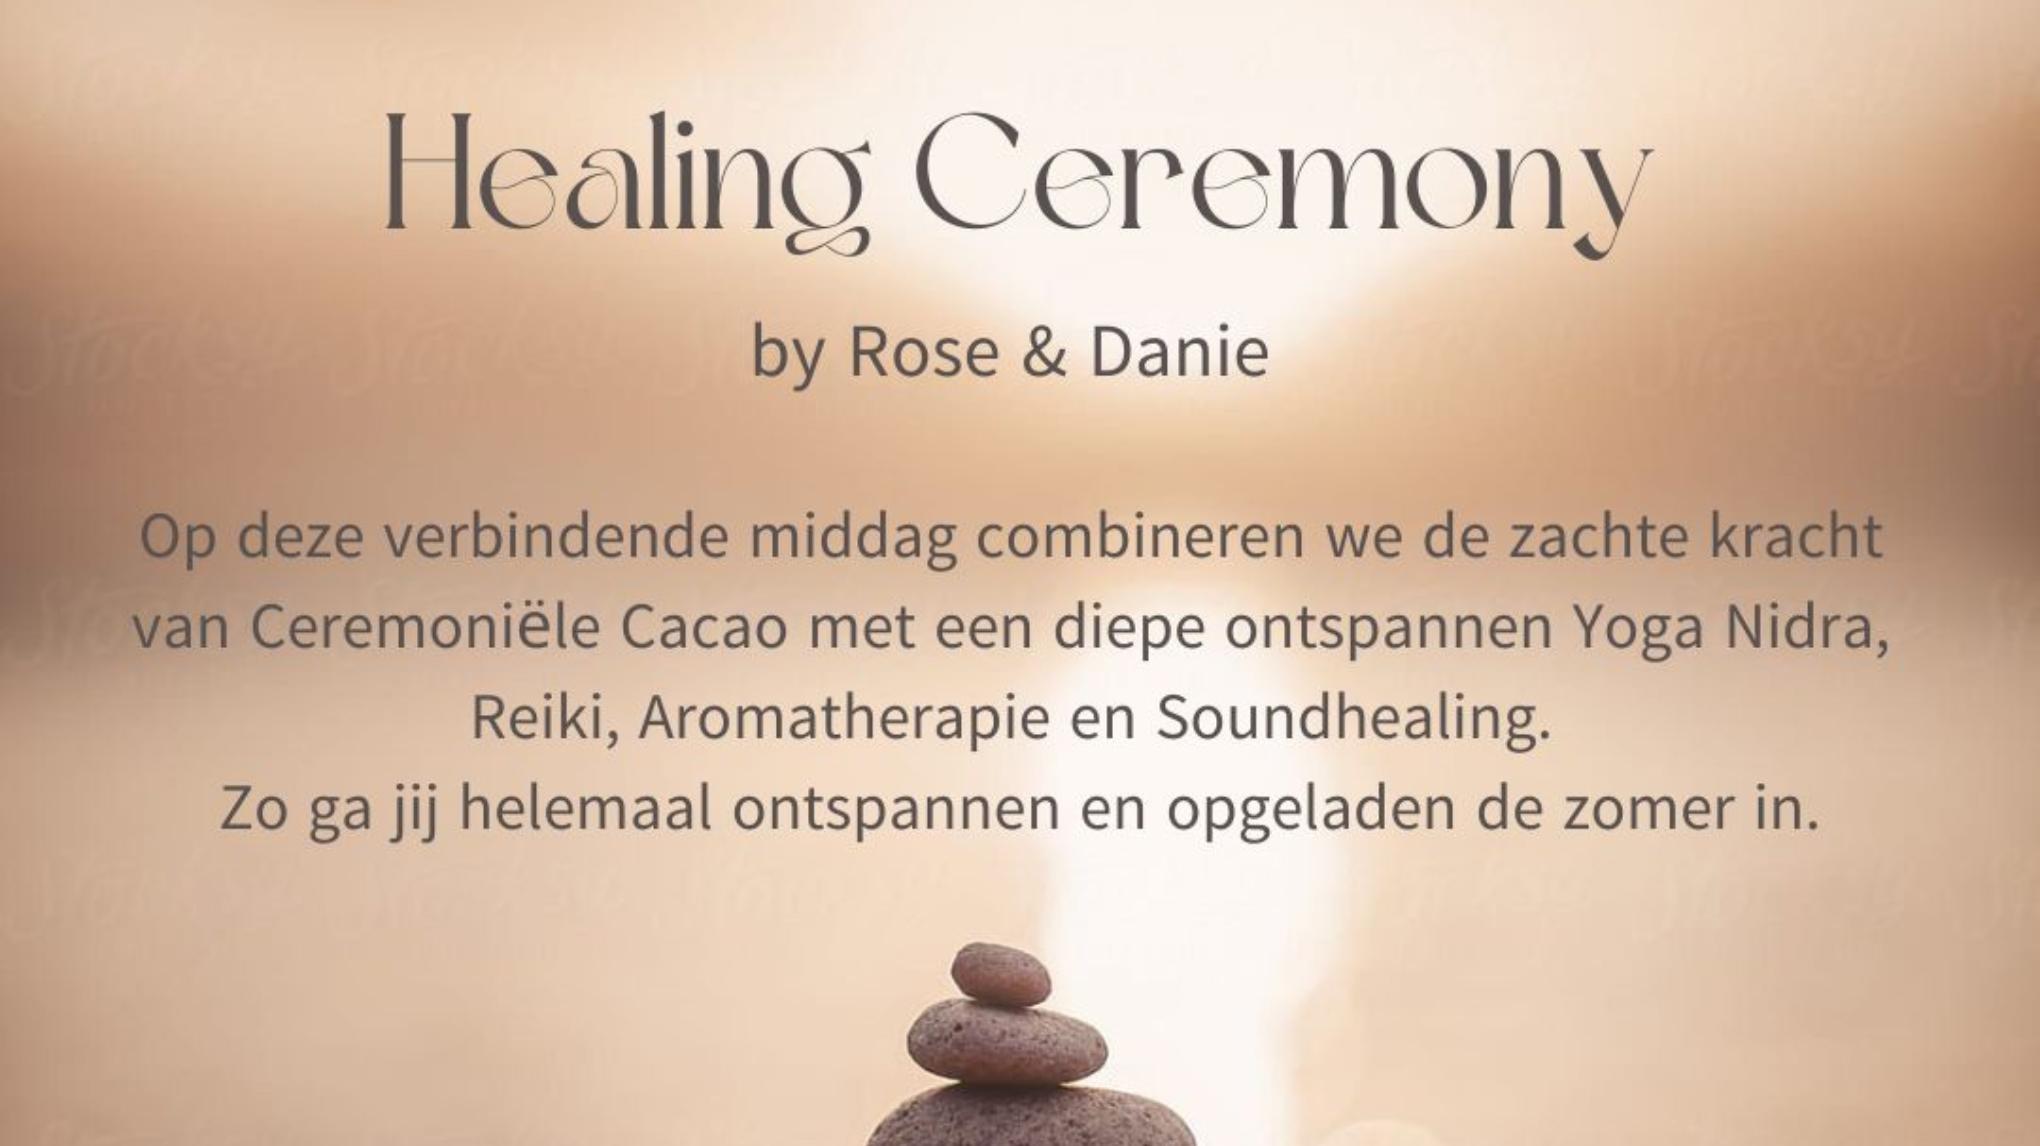 Cacao Ceremonie, Yoga Nidra & Healing || Open YOUR heart, change your life